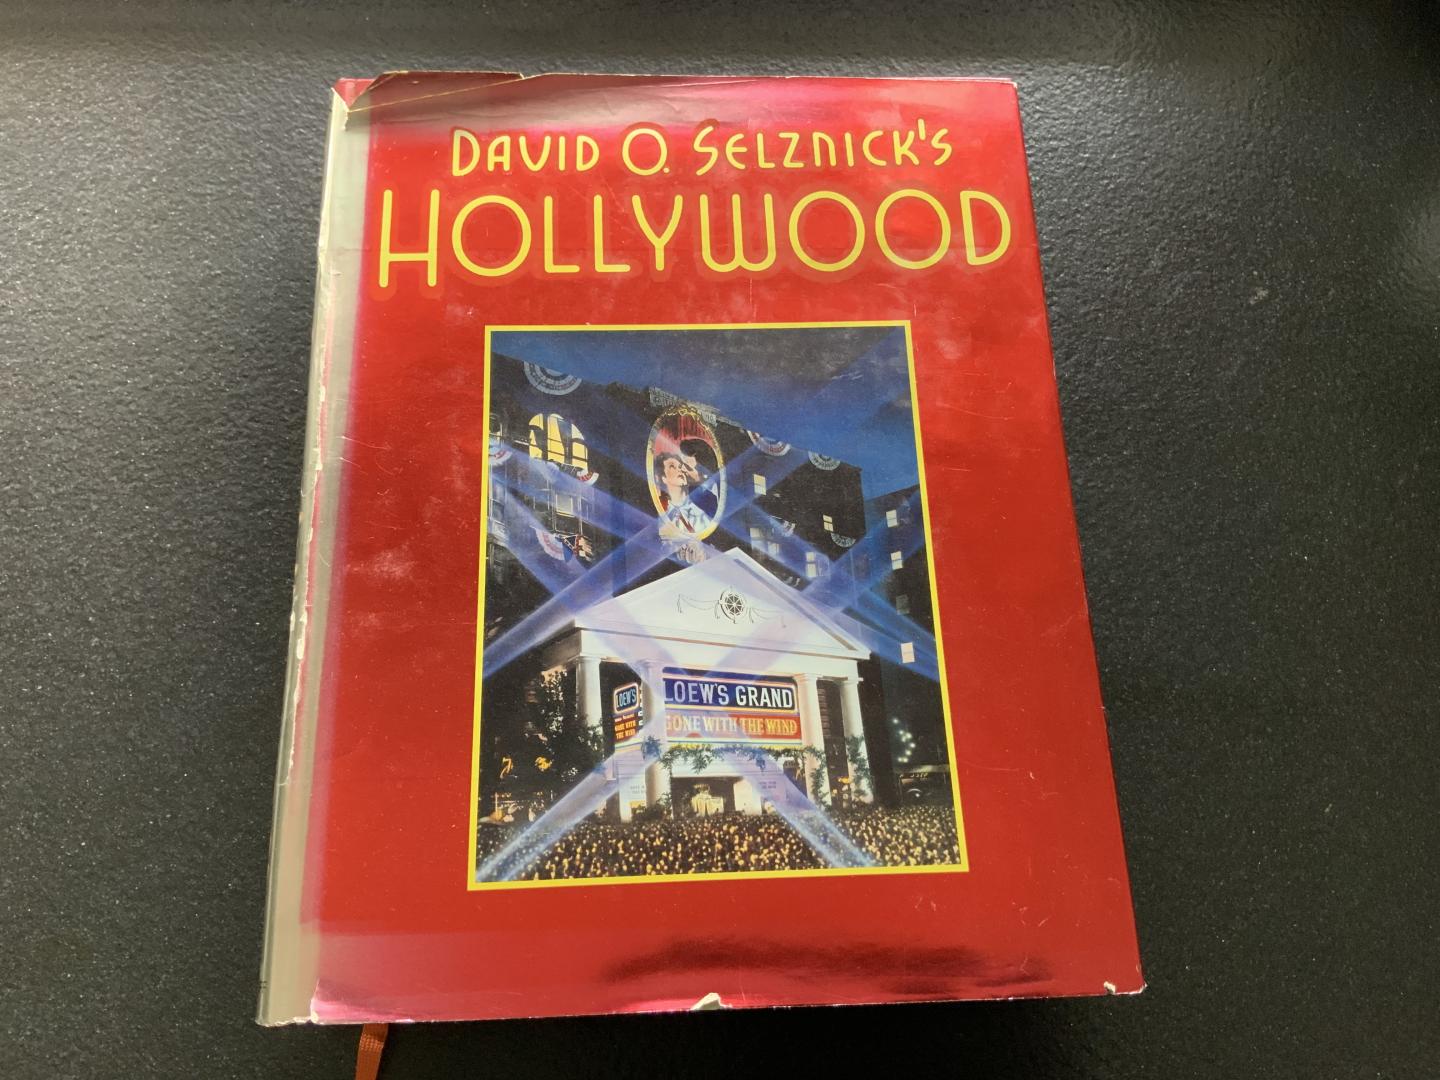 Haver - Selznick s hollywood eng. ed.